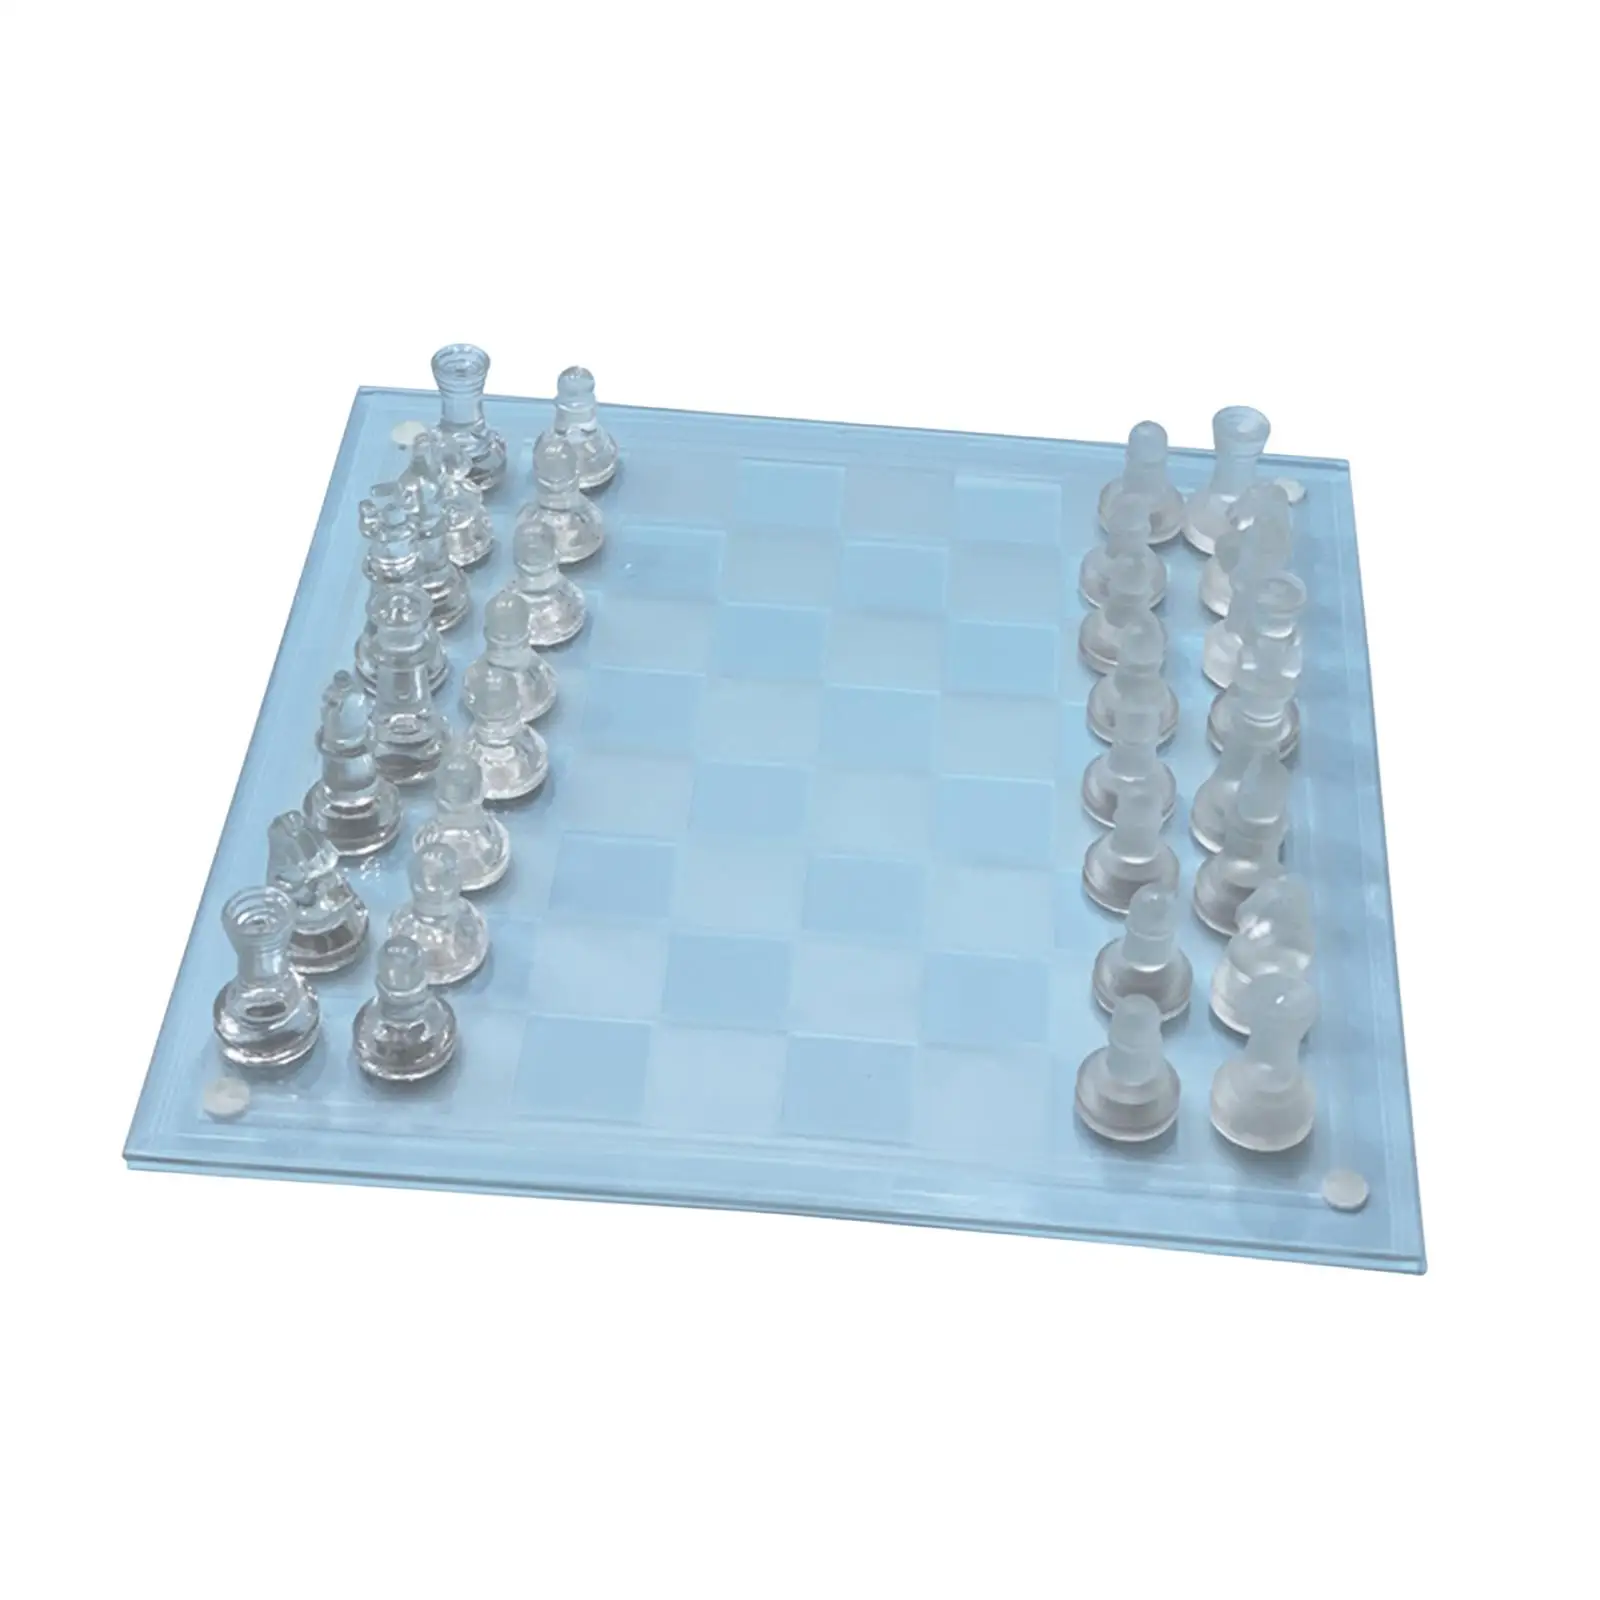 Crystal Chess Board Adults Play Set 13.78`x13.78`` for Game Reunion Picnics